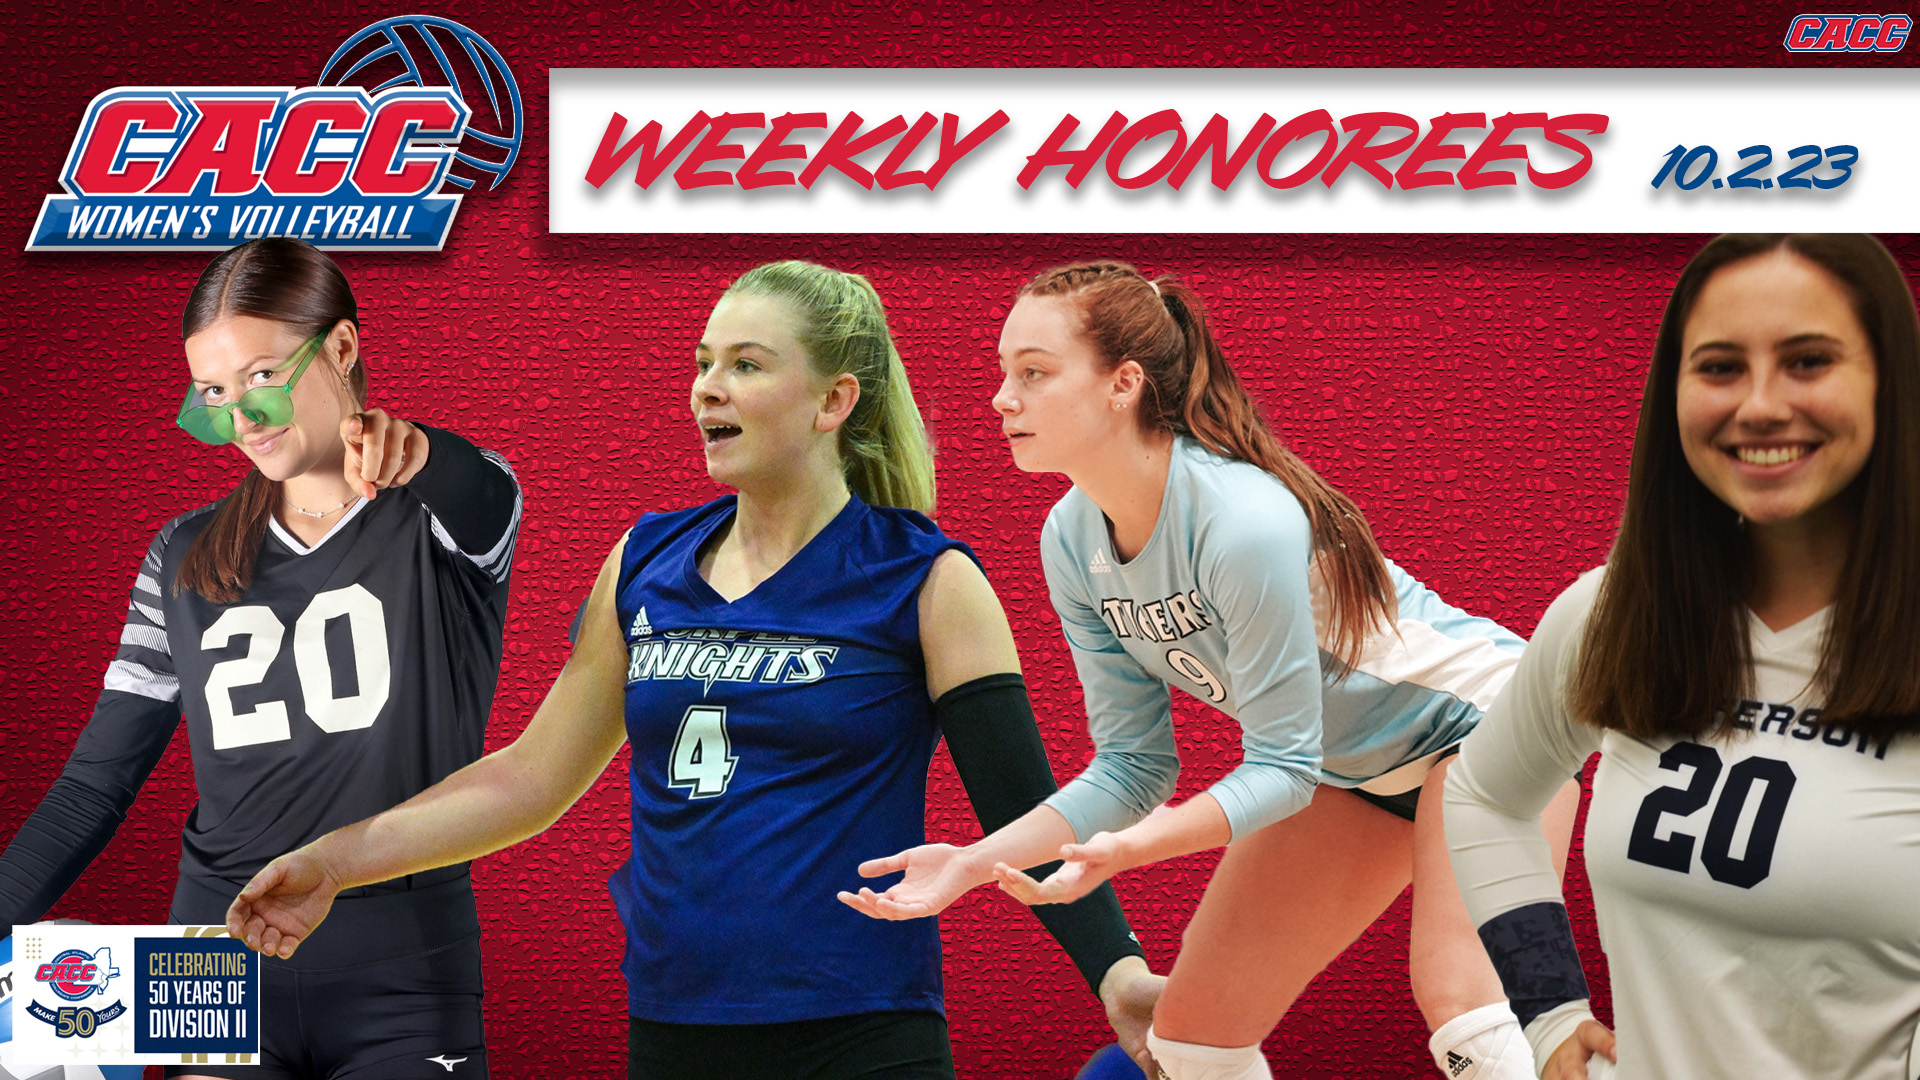 CACC Women's Volleyball Weekly Honorees (10-2-23)